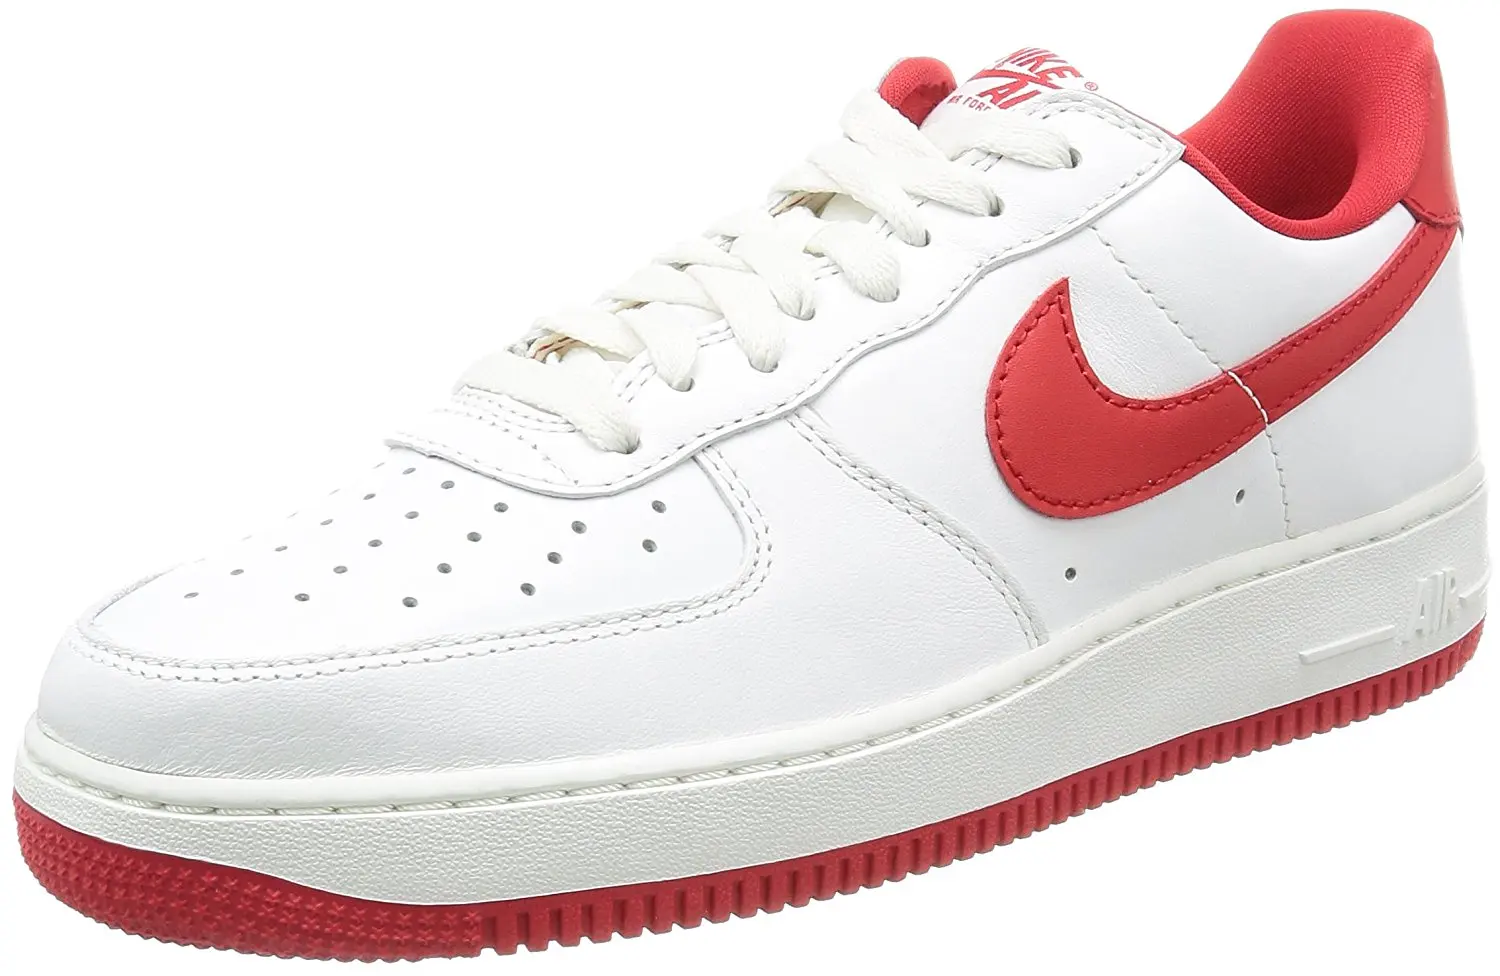 Cheap Nike Air Force 1 Low, find Nike Air Force 1 Low deals on line at